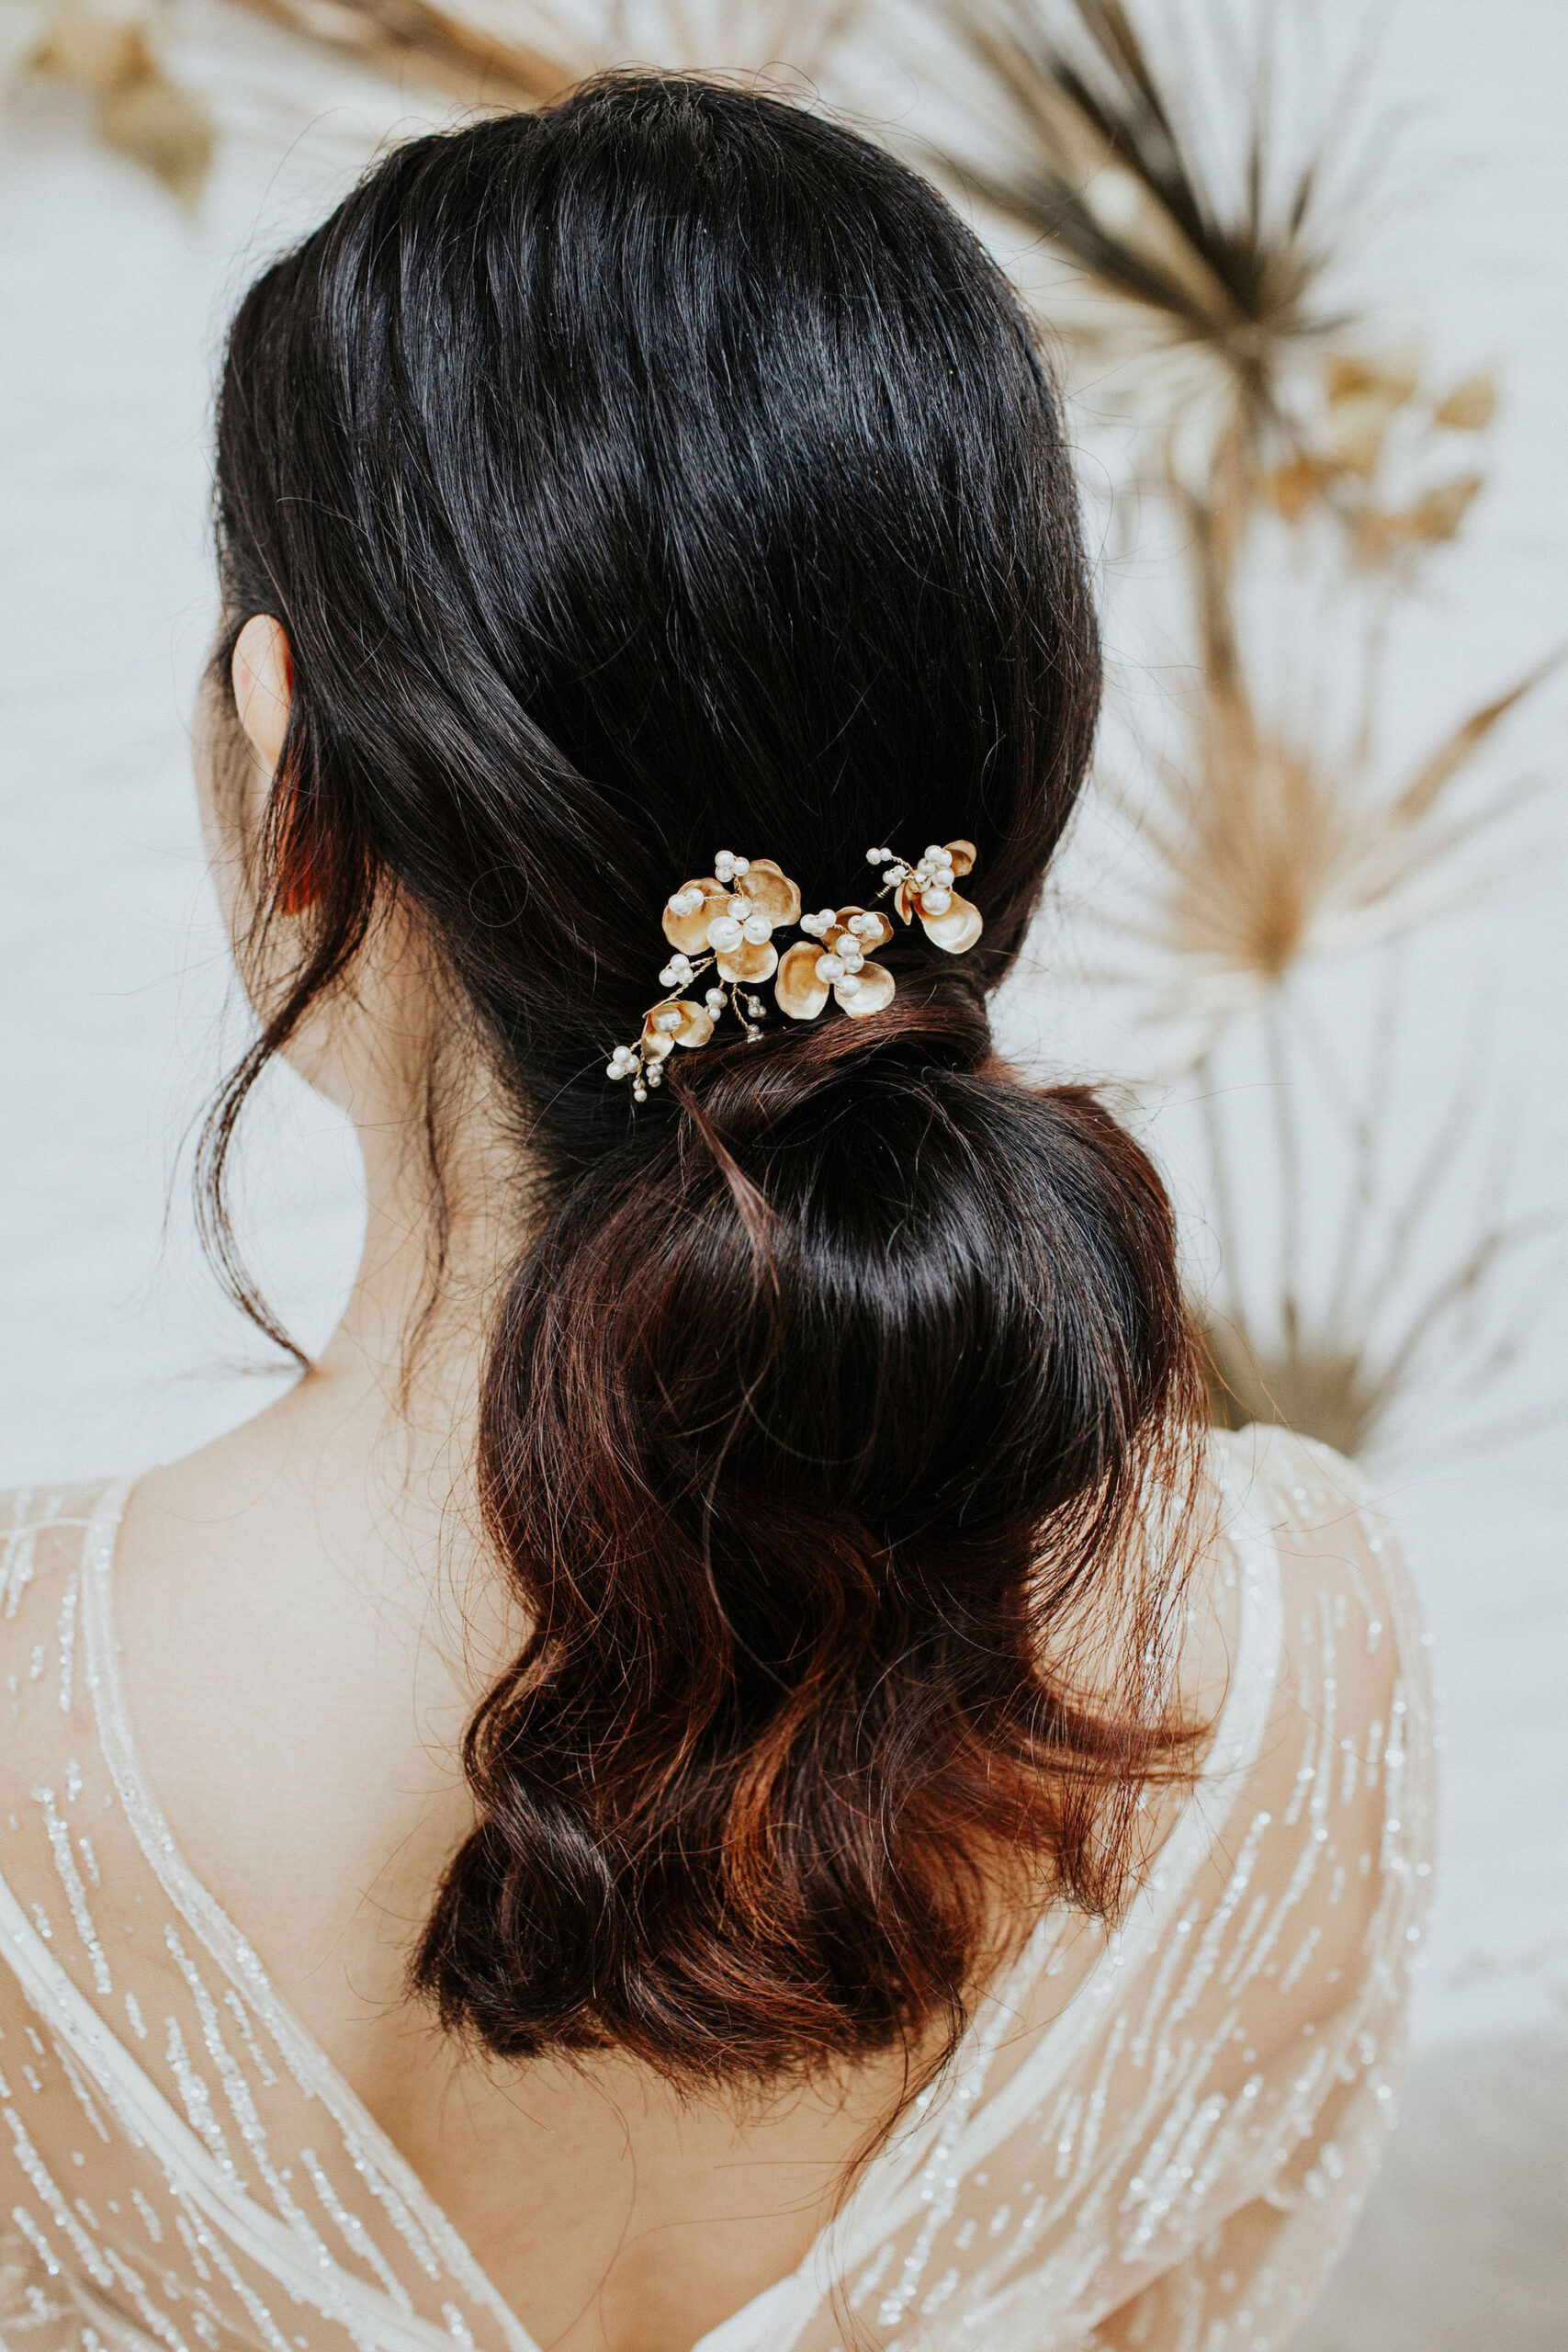 bespoke UK bridal accessories by Clare Lloyd with delicate floral designs. Captured by Oxi Photography